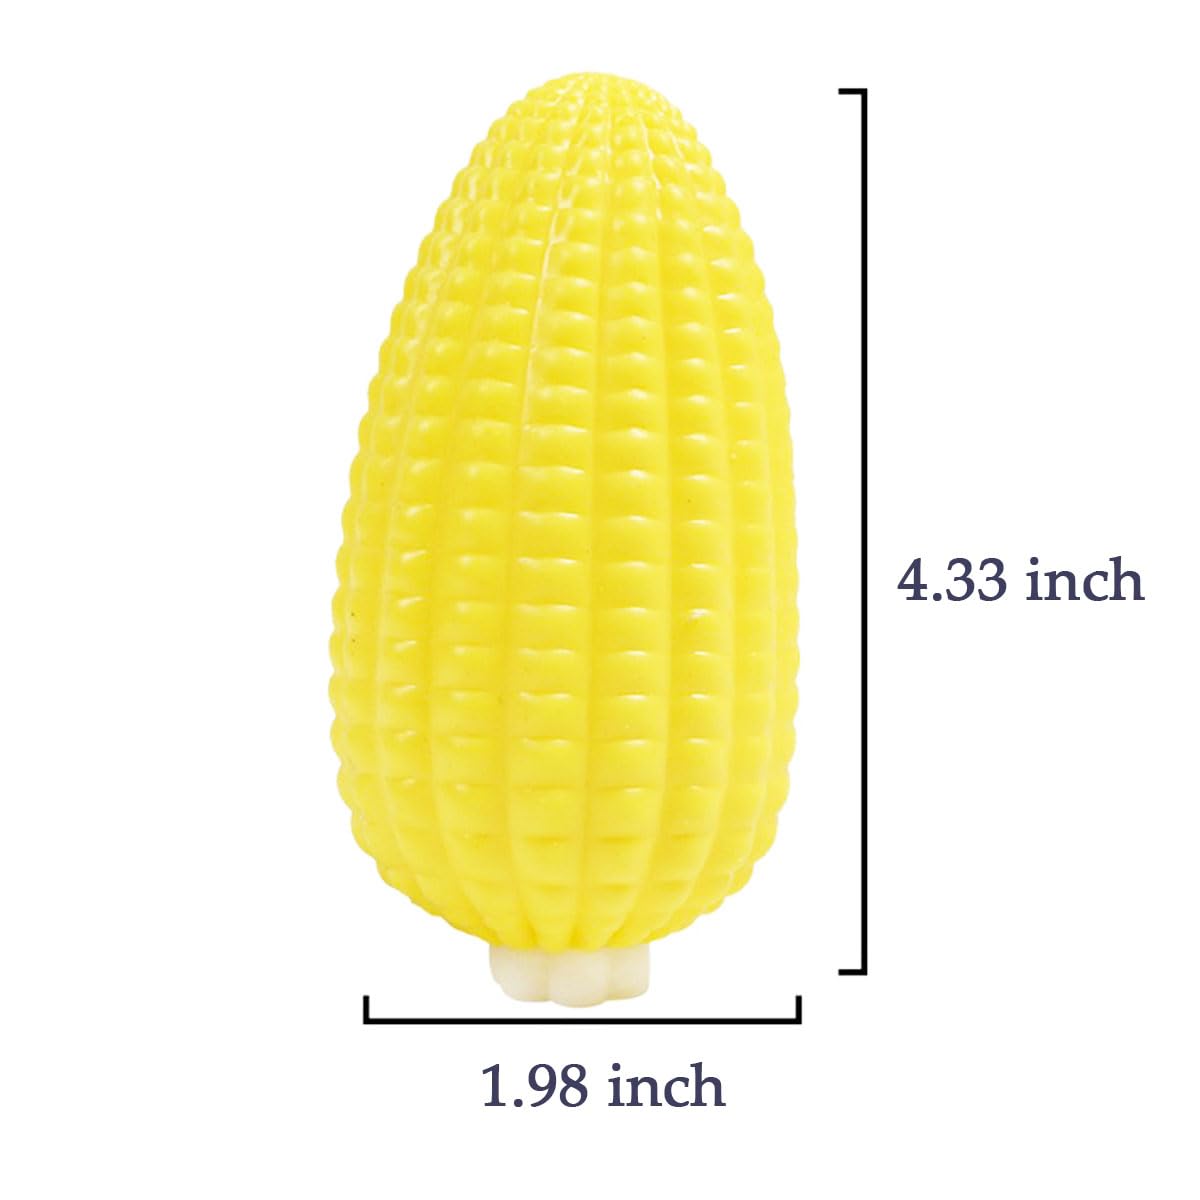 Stretchy Stress Relief Corn Squeeze Toys,Squishy Stress Relief Toys for Adults and Kids